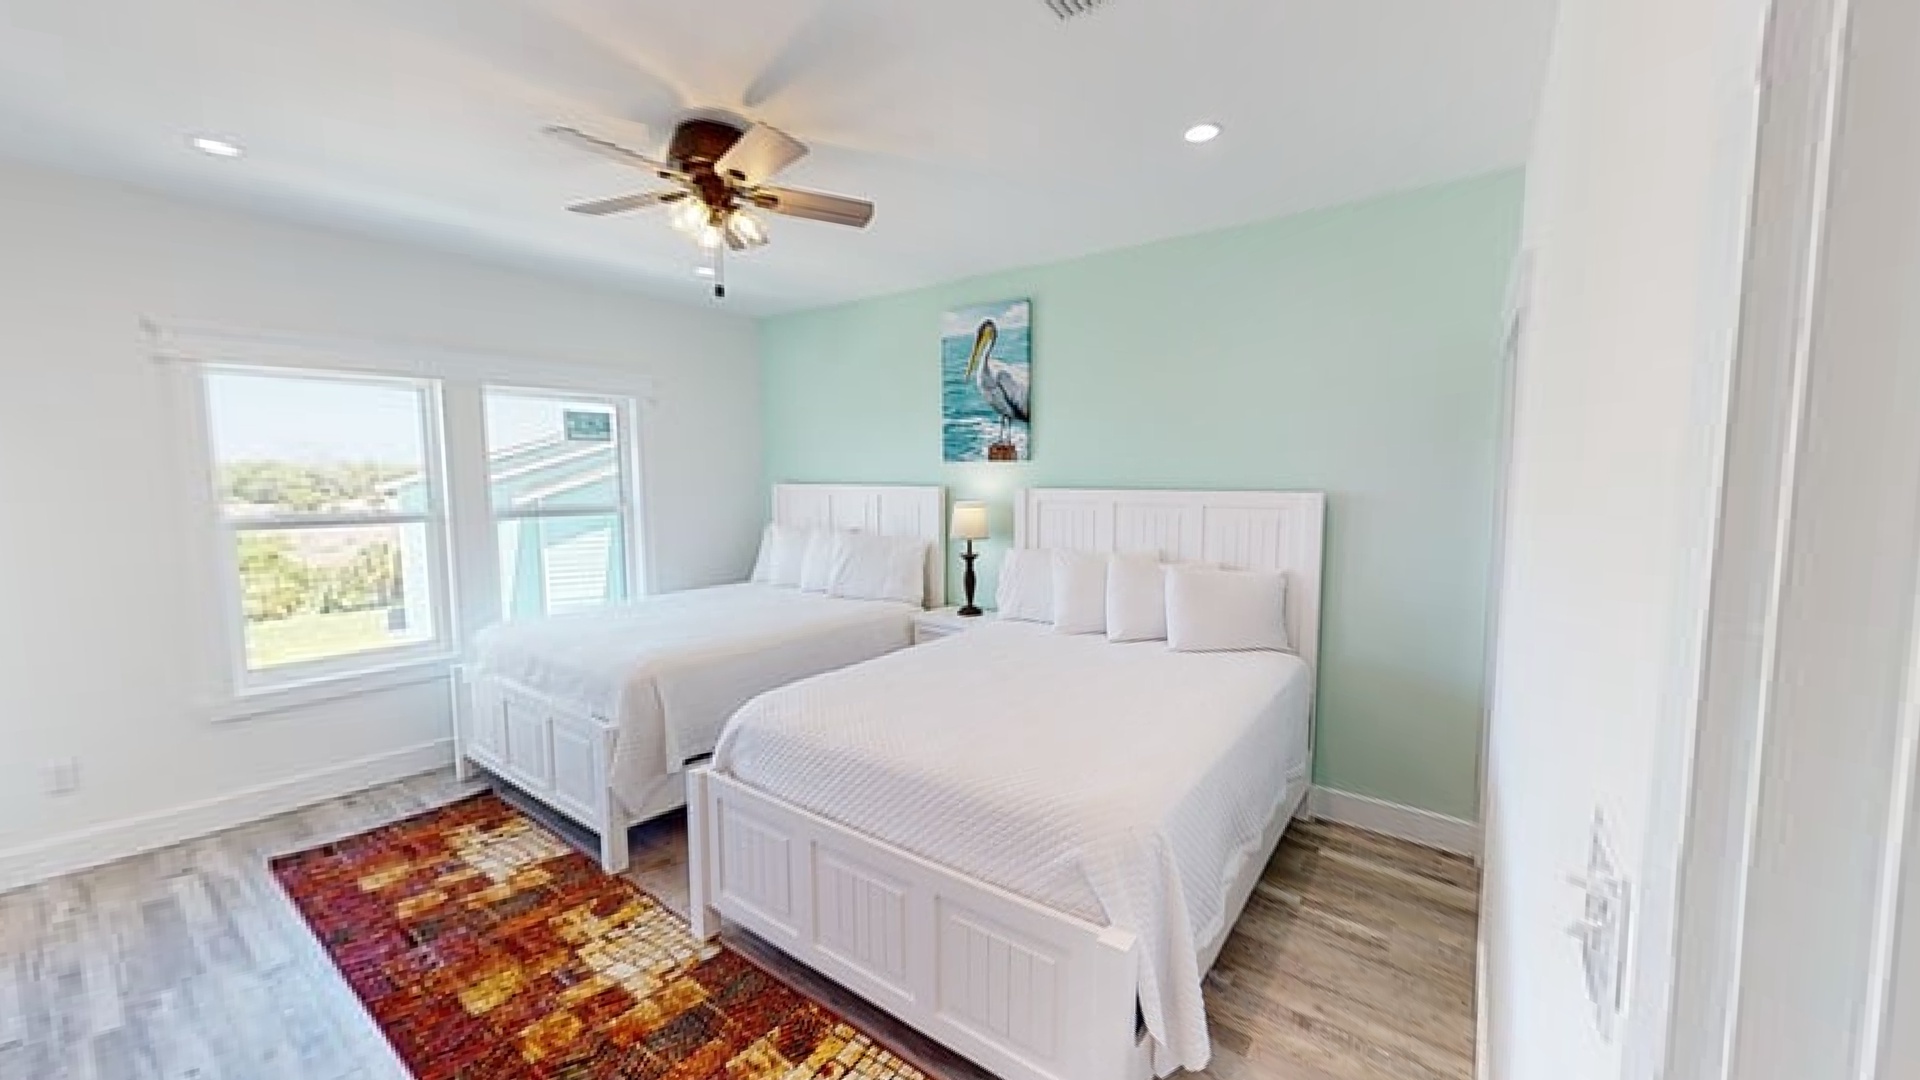 Bedroom 6 is on the 2nd floor and features 2 queen beds and a private bathroom